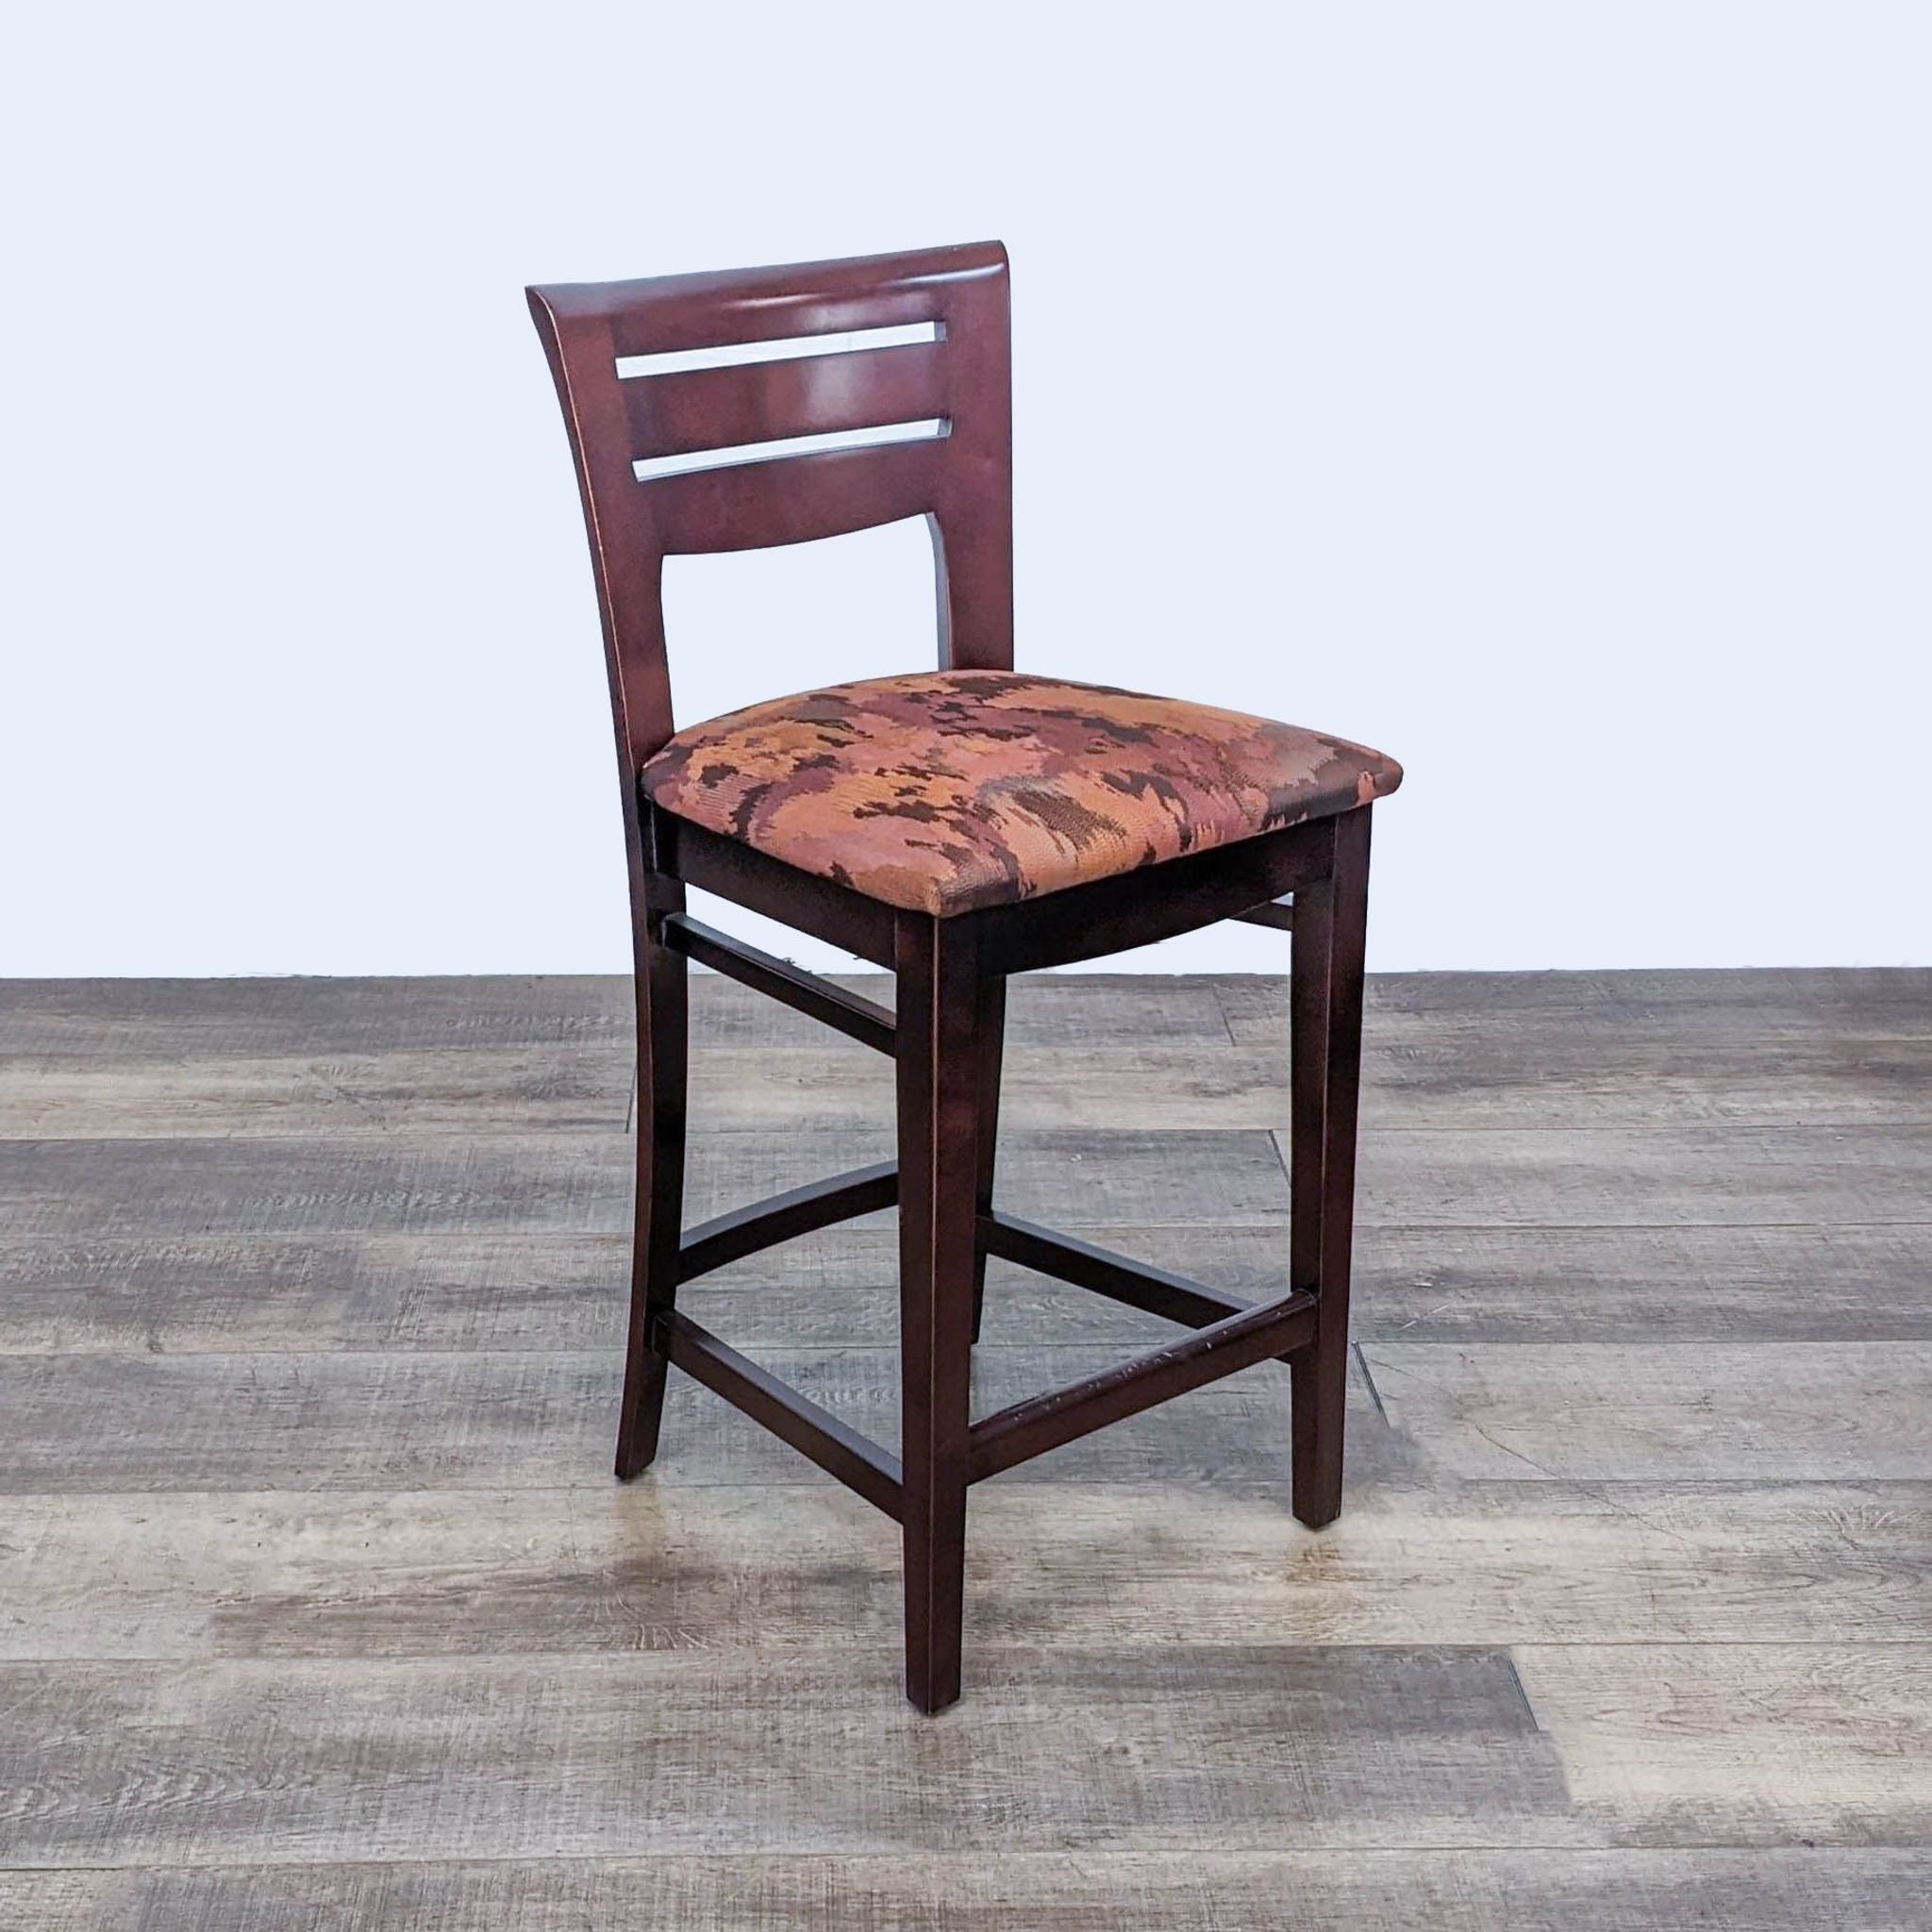 Reperch stool with a dark wood frame and a seat covered in a fabric with an earth-toned pattern, against a gray wood floor.